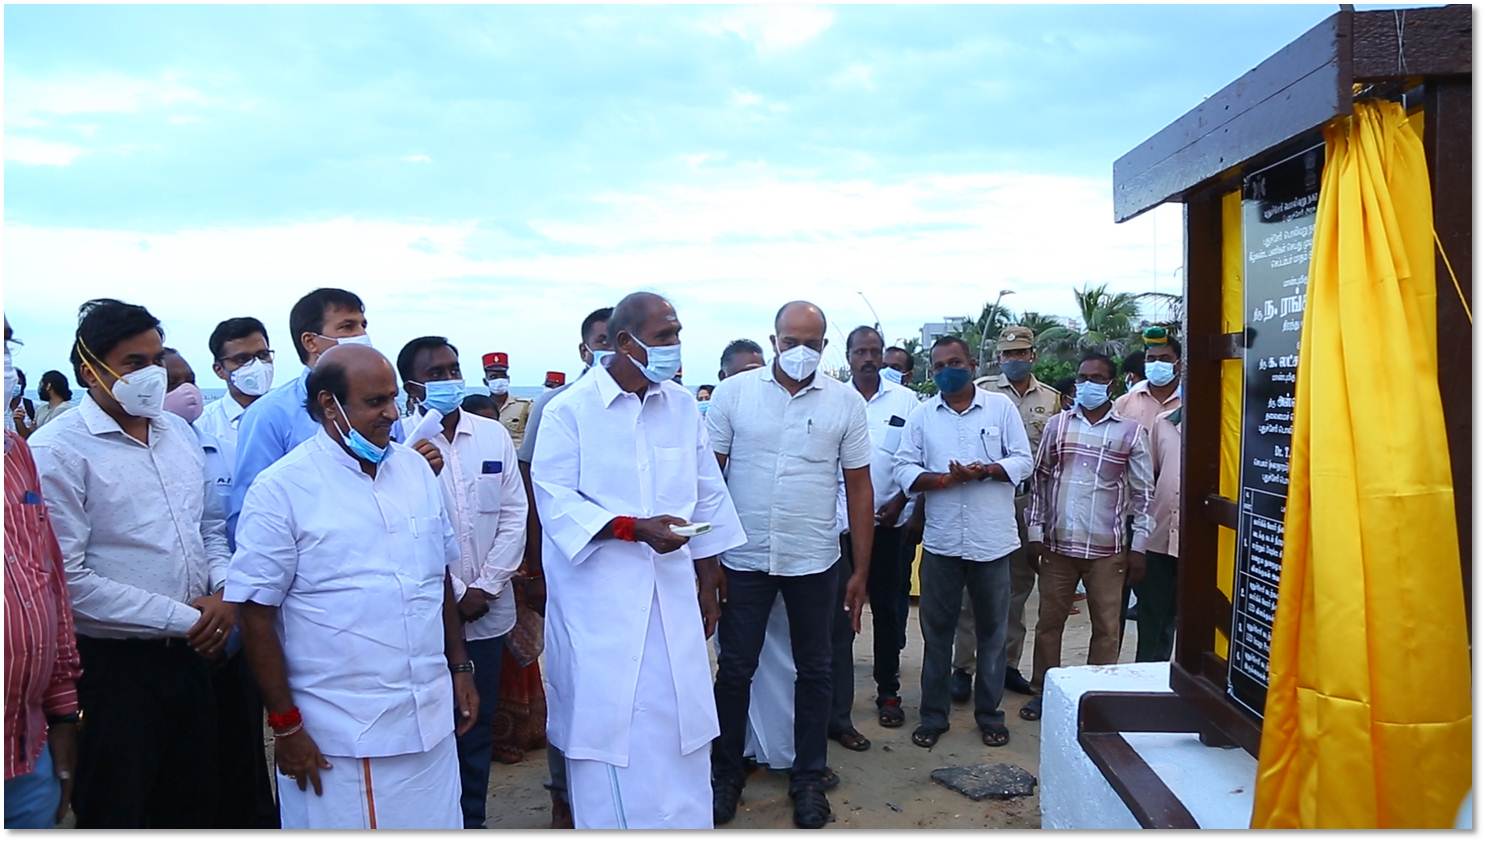 Decorative LED lighting in puducherry beach area inaugurated by HCM